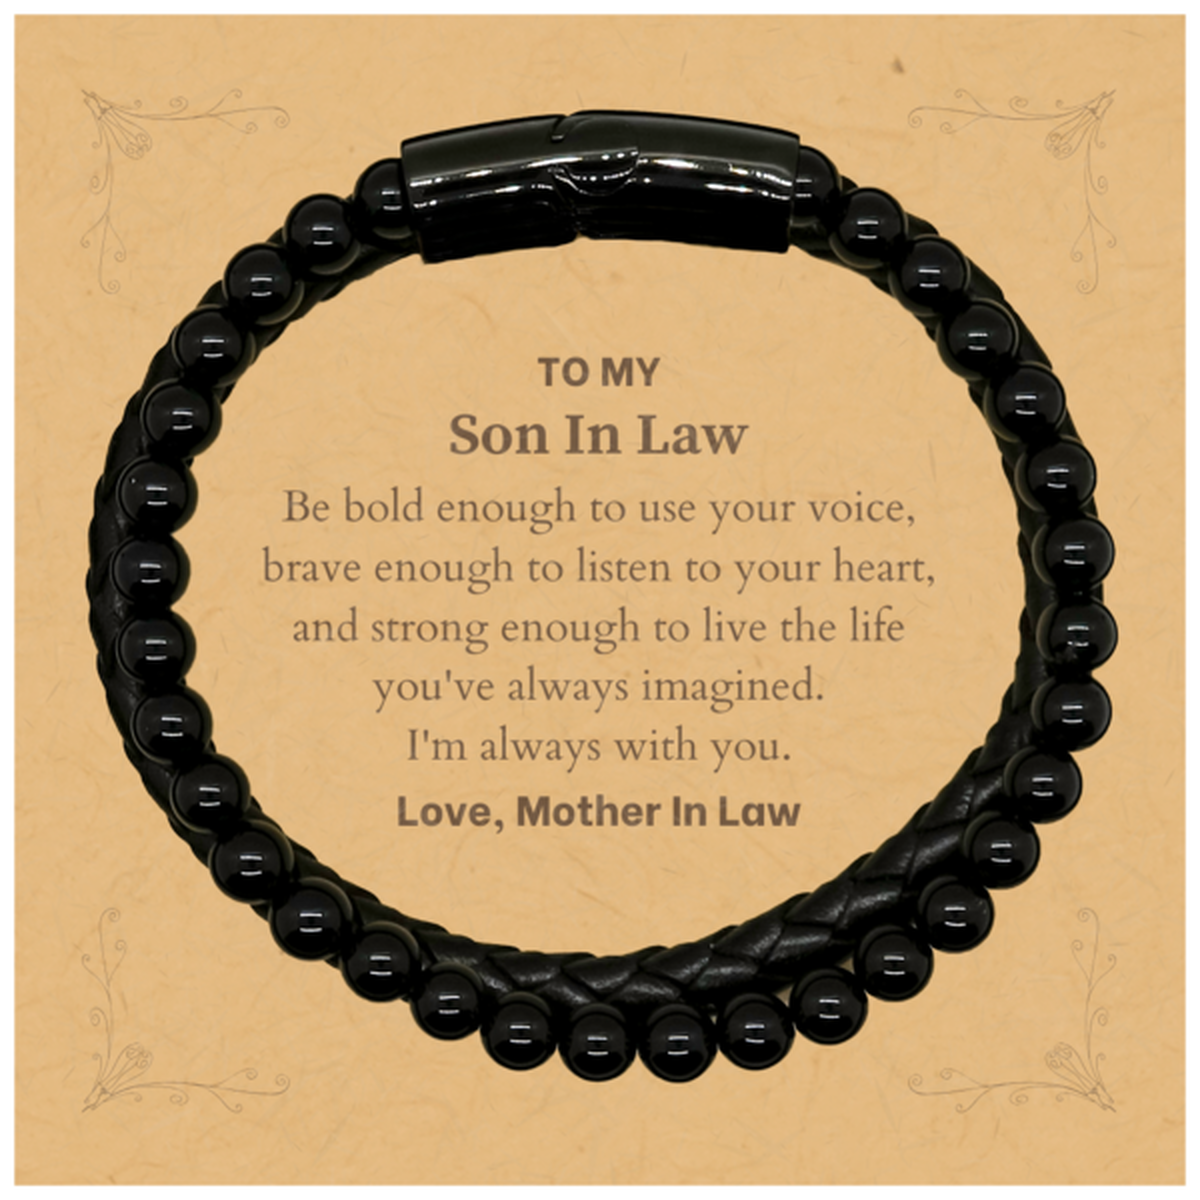 Keepsake Son In Law Stone Leather Bracelets Gift Idea Graduation Christmas Birthday Son In Law from Mother In Law, Son In Law Be bold enough to use your voice, brave enough to listen to your heart. Love, Mother In Law